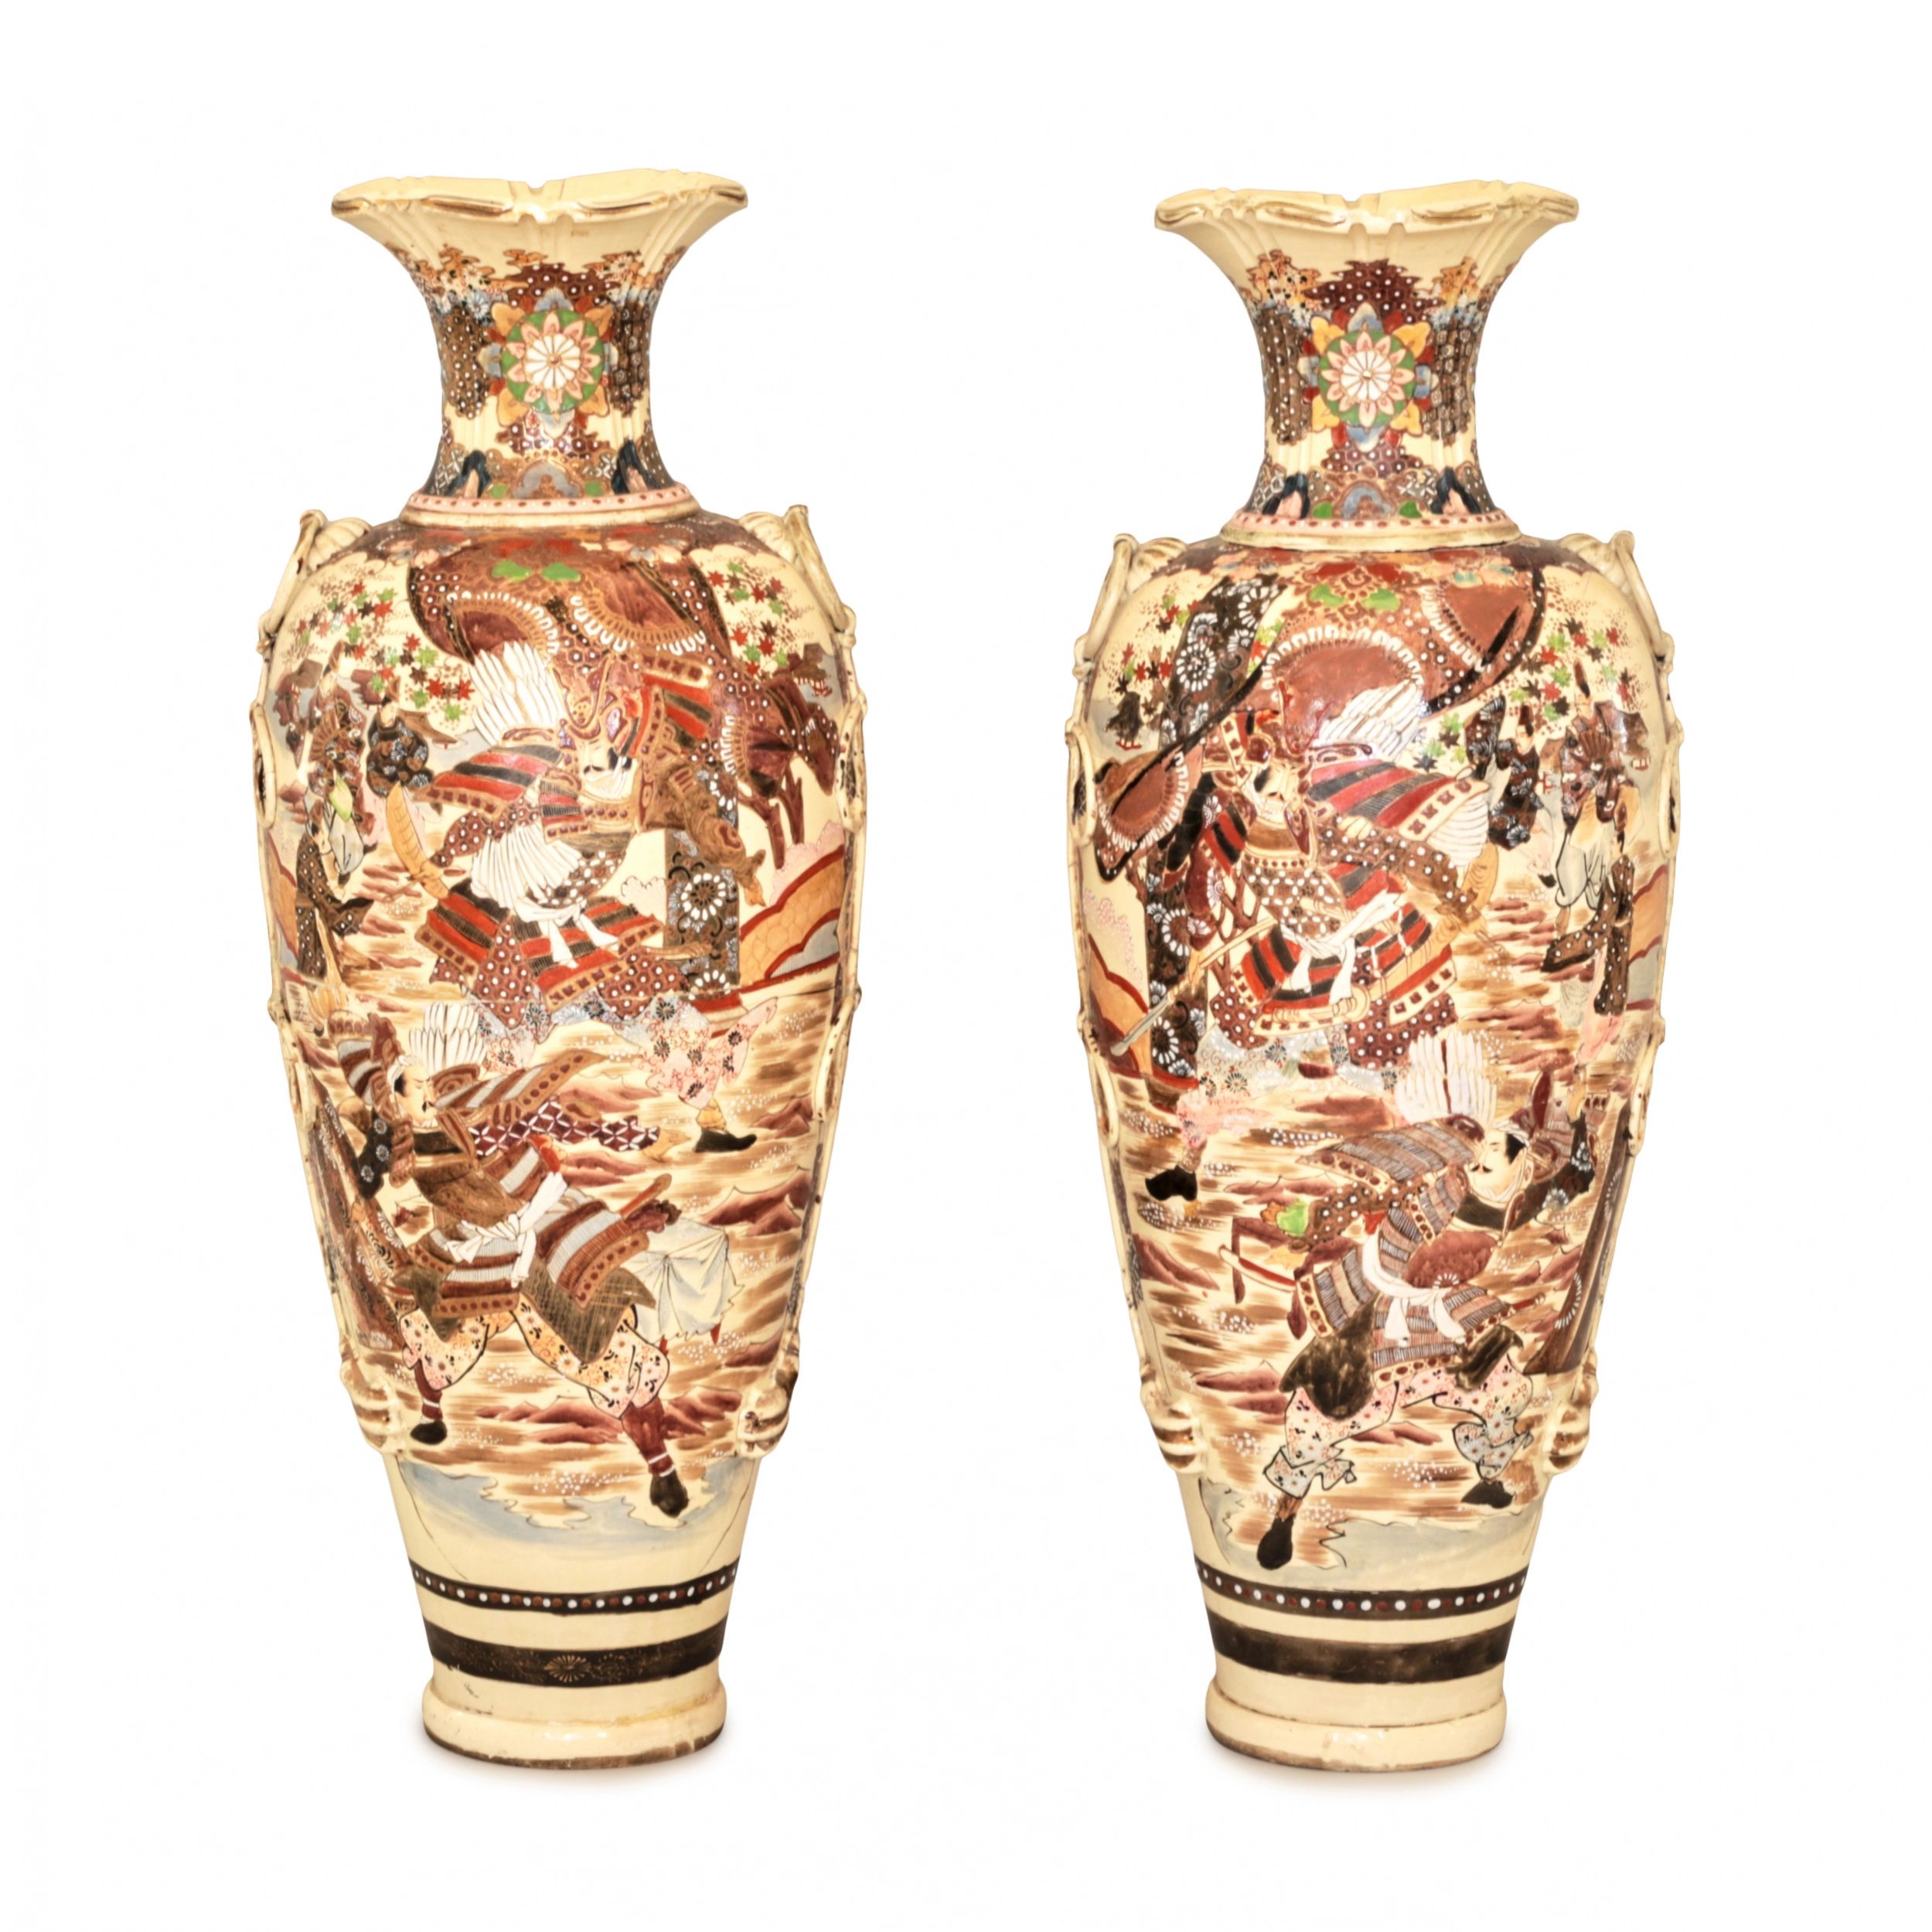 Pair-of-outdoor-Japanese-Satsuma-vases-